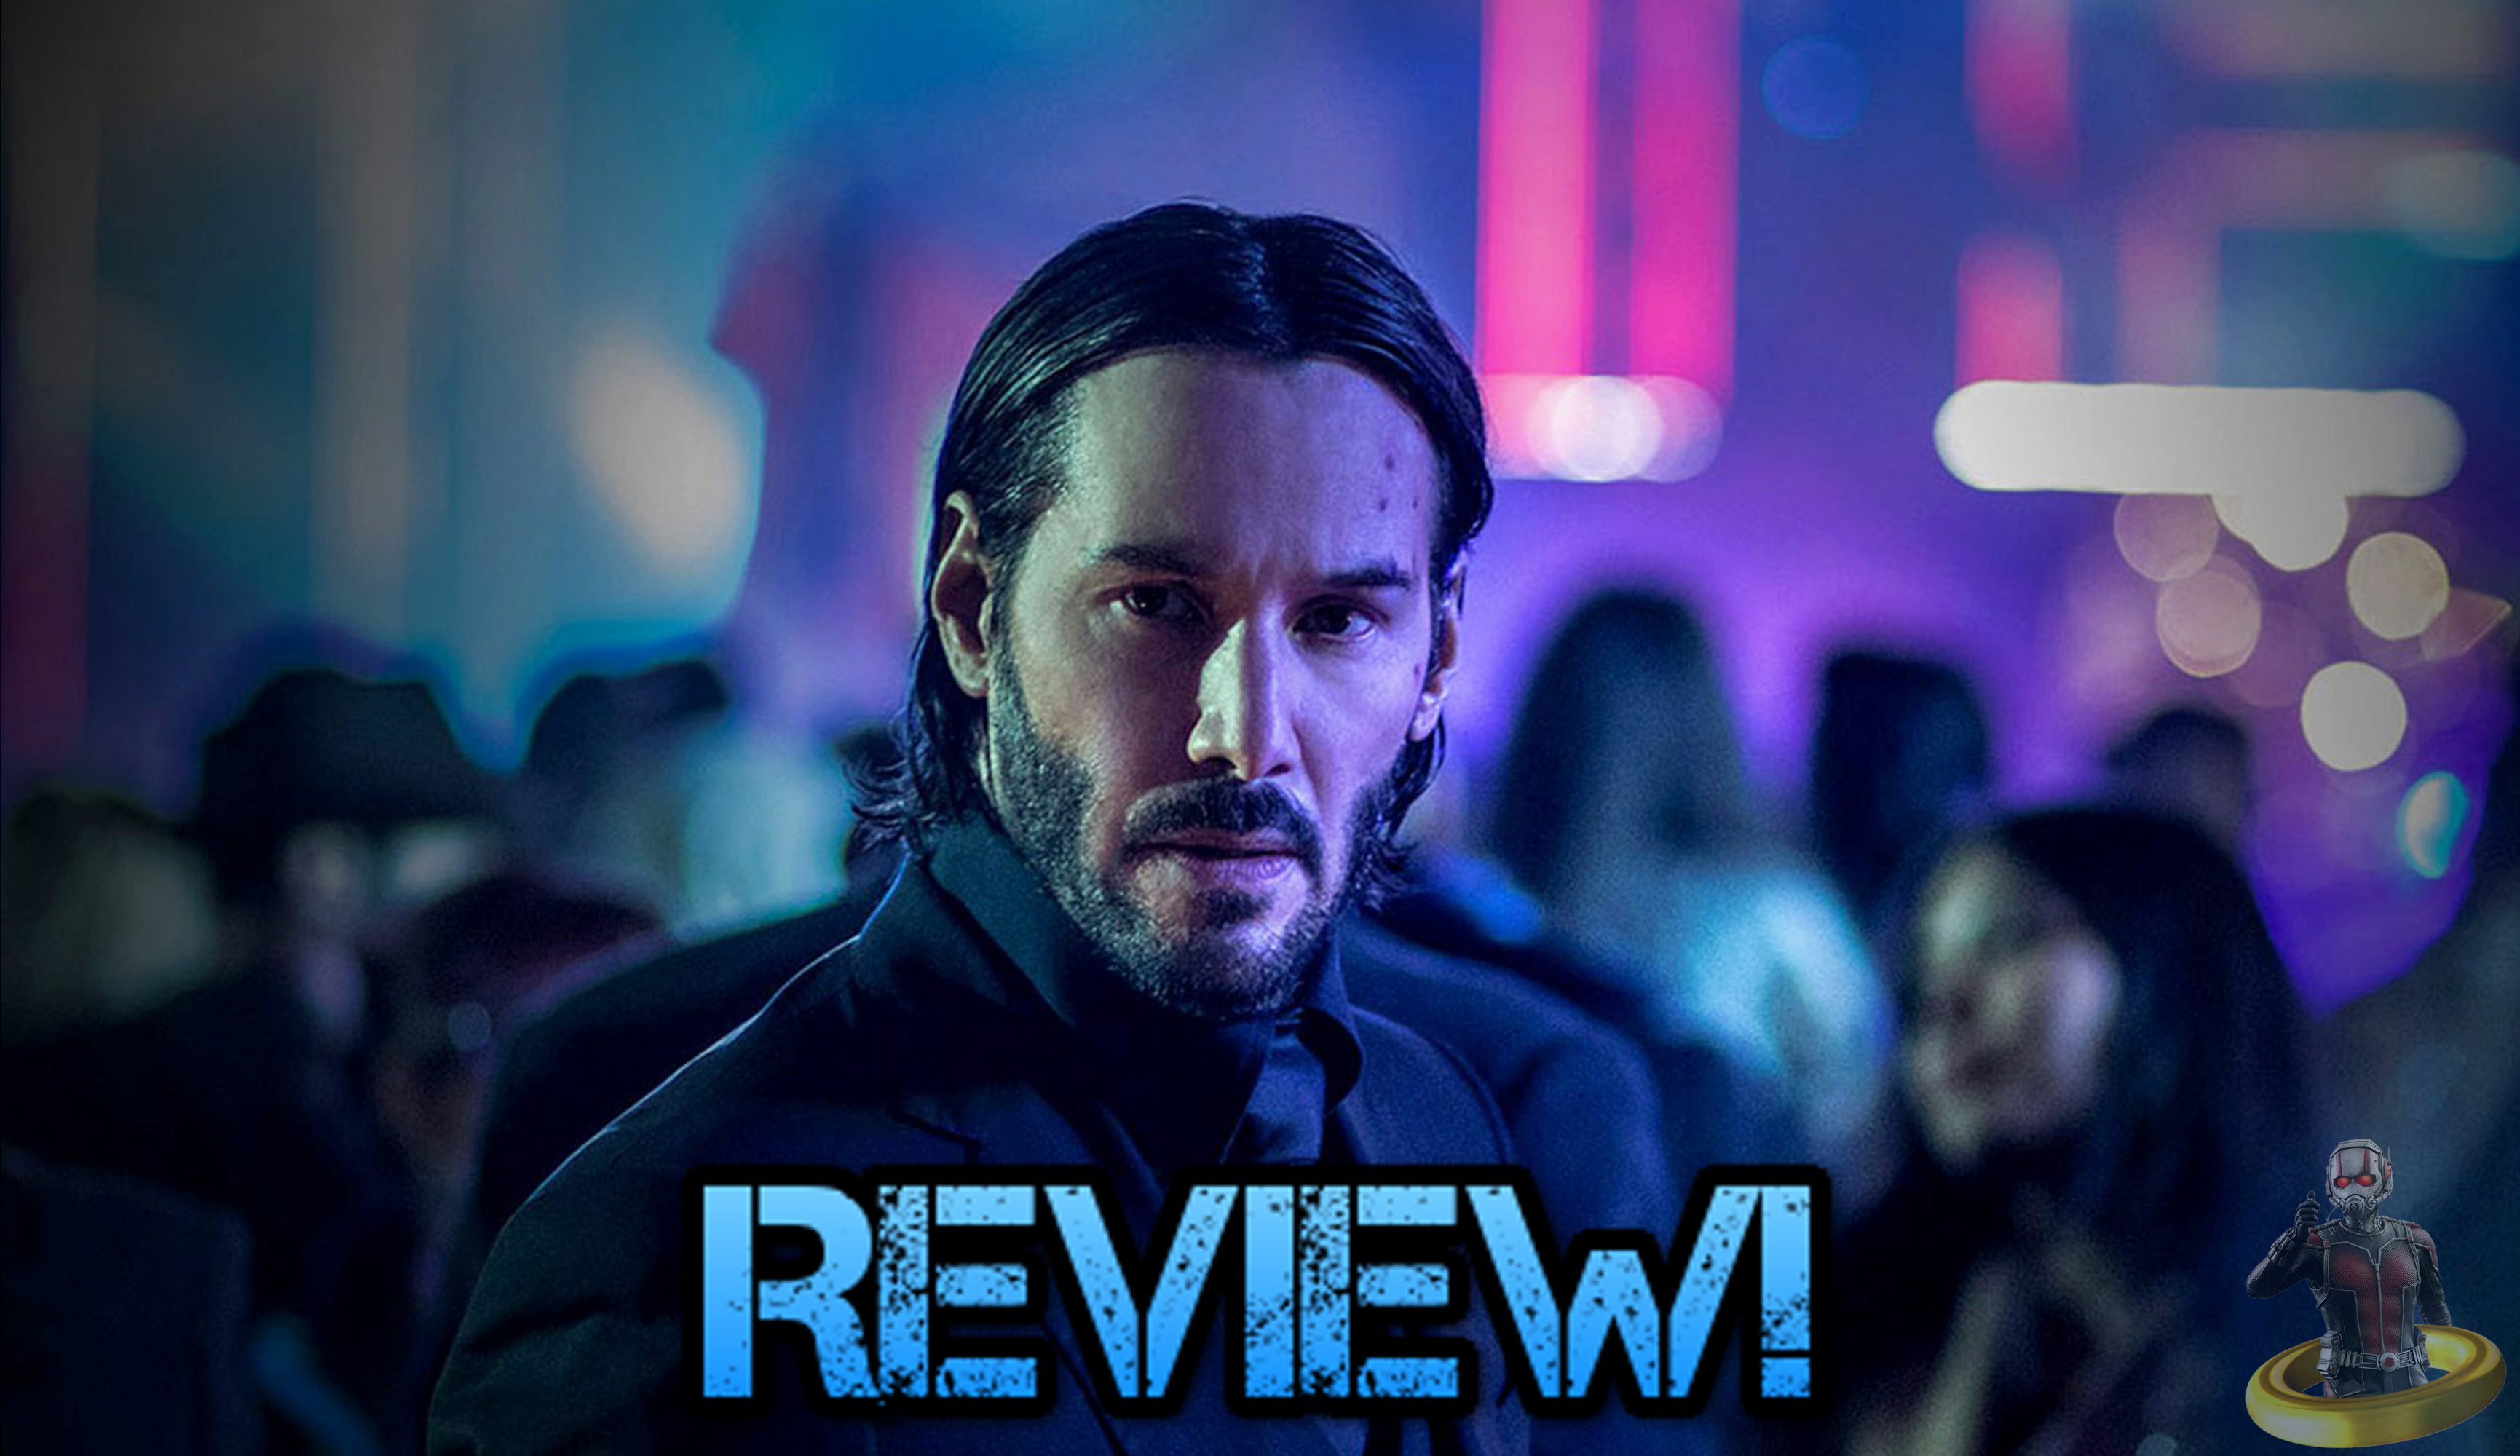 REVIEW: John Wick 3 sticks with series' style - The HUB